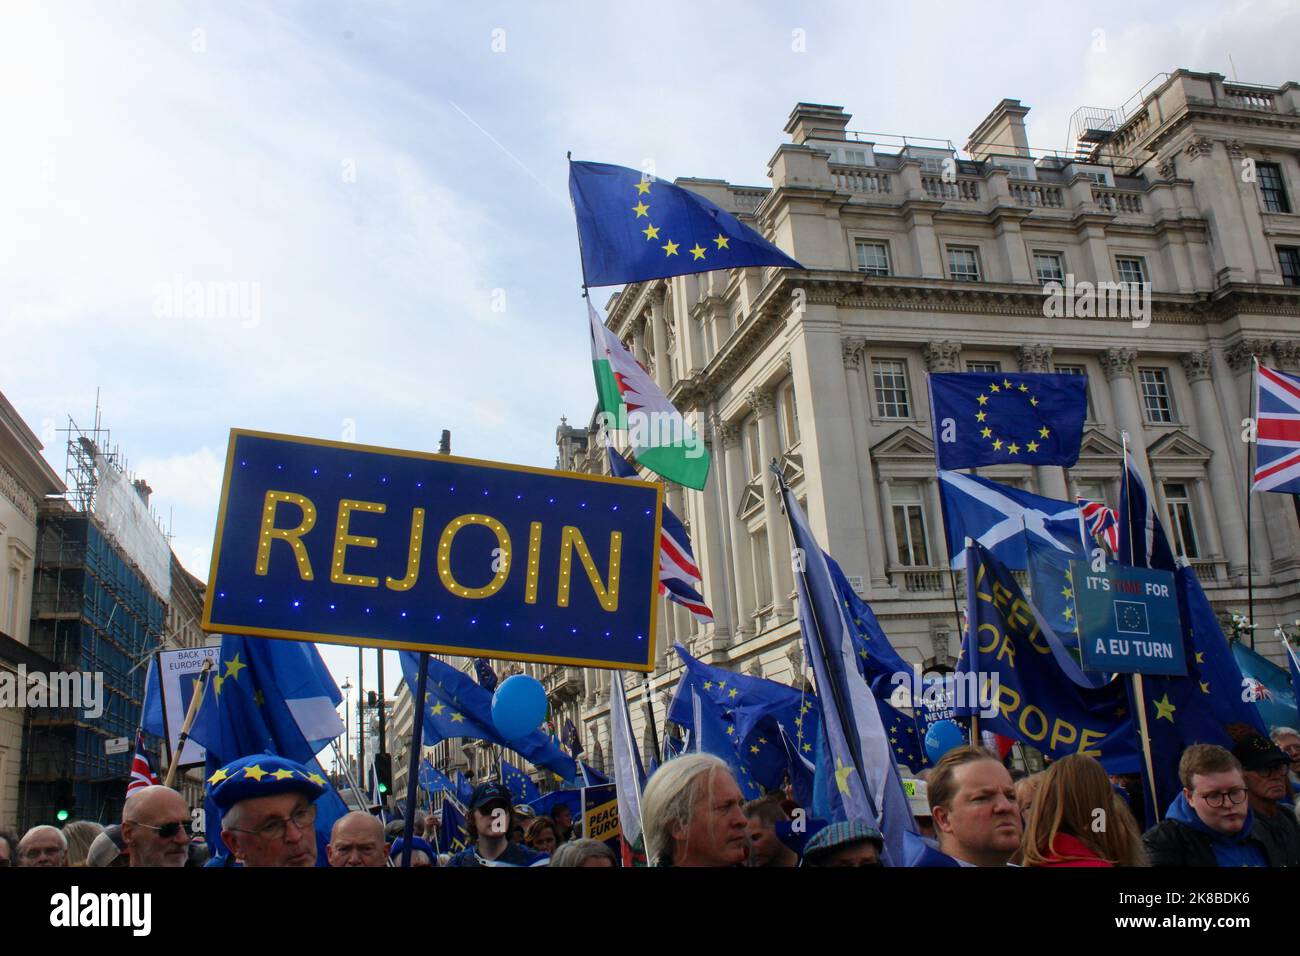 illuminated rejoin sign at the first ever national rejoin the european union march in central london england UK 22nd october 2022 Stock Photo